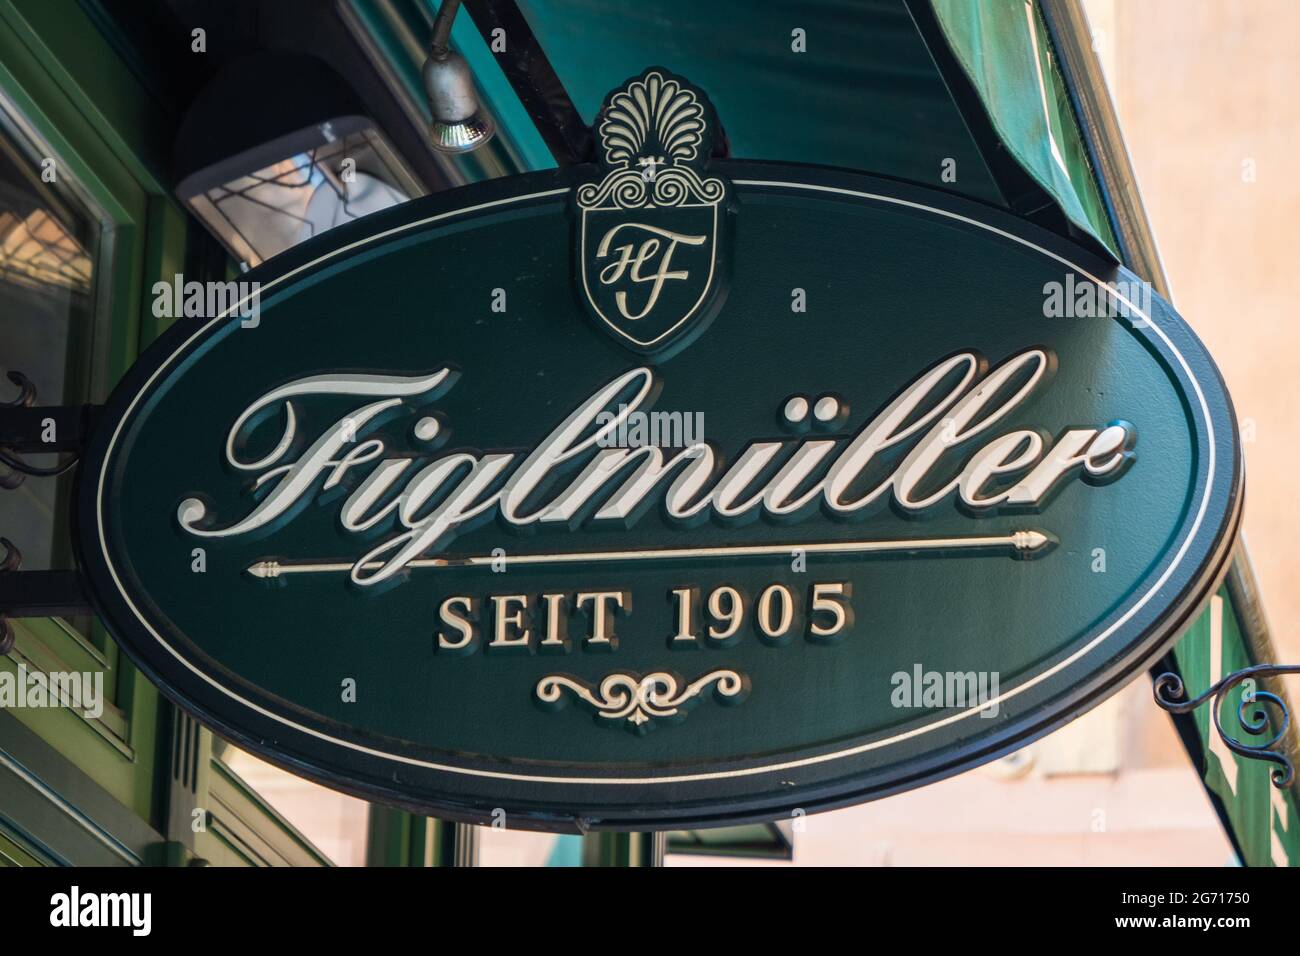 Vienna, Austria - June 4 2021: Figlmueller Restaurant Entrance Sign. An Inn Famous for its Wiener Schnitzel and Traditional Viennese Cuisine. Stock Photo